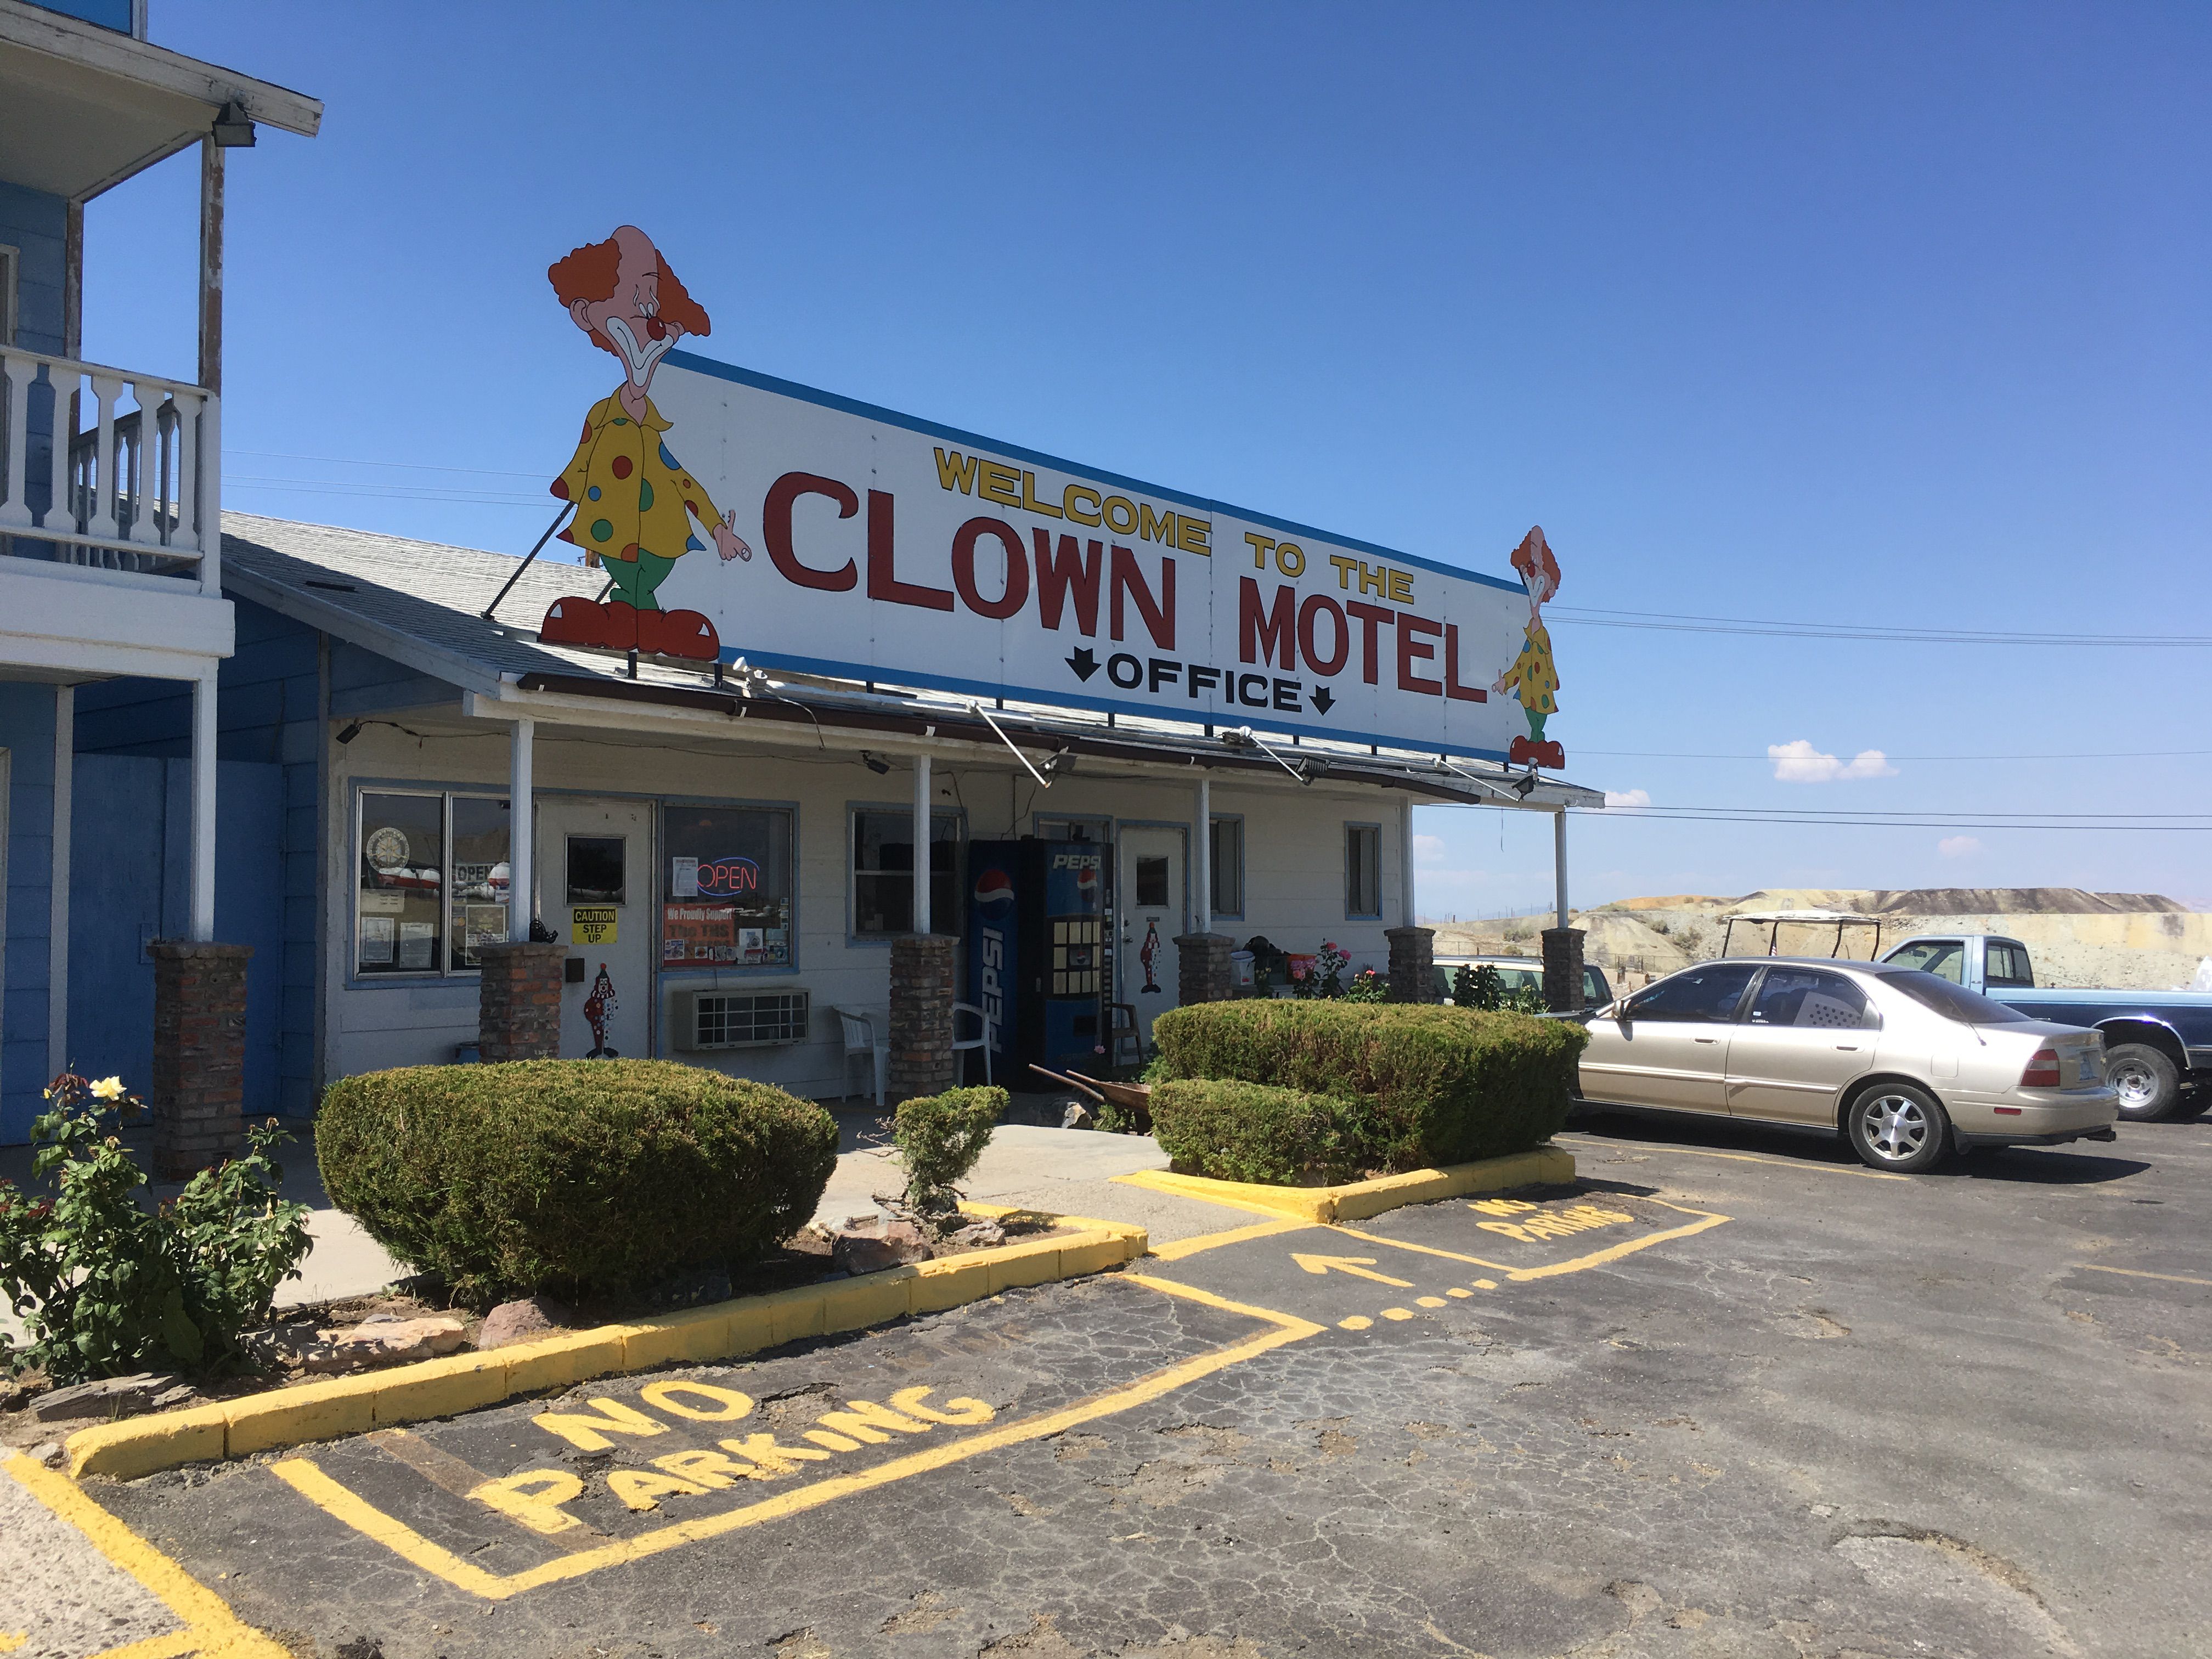 Silver State Sights: The Clown Motel